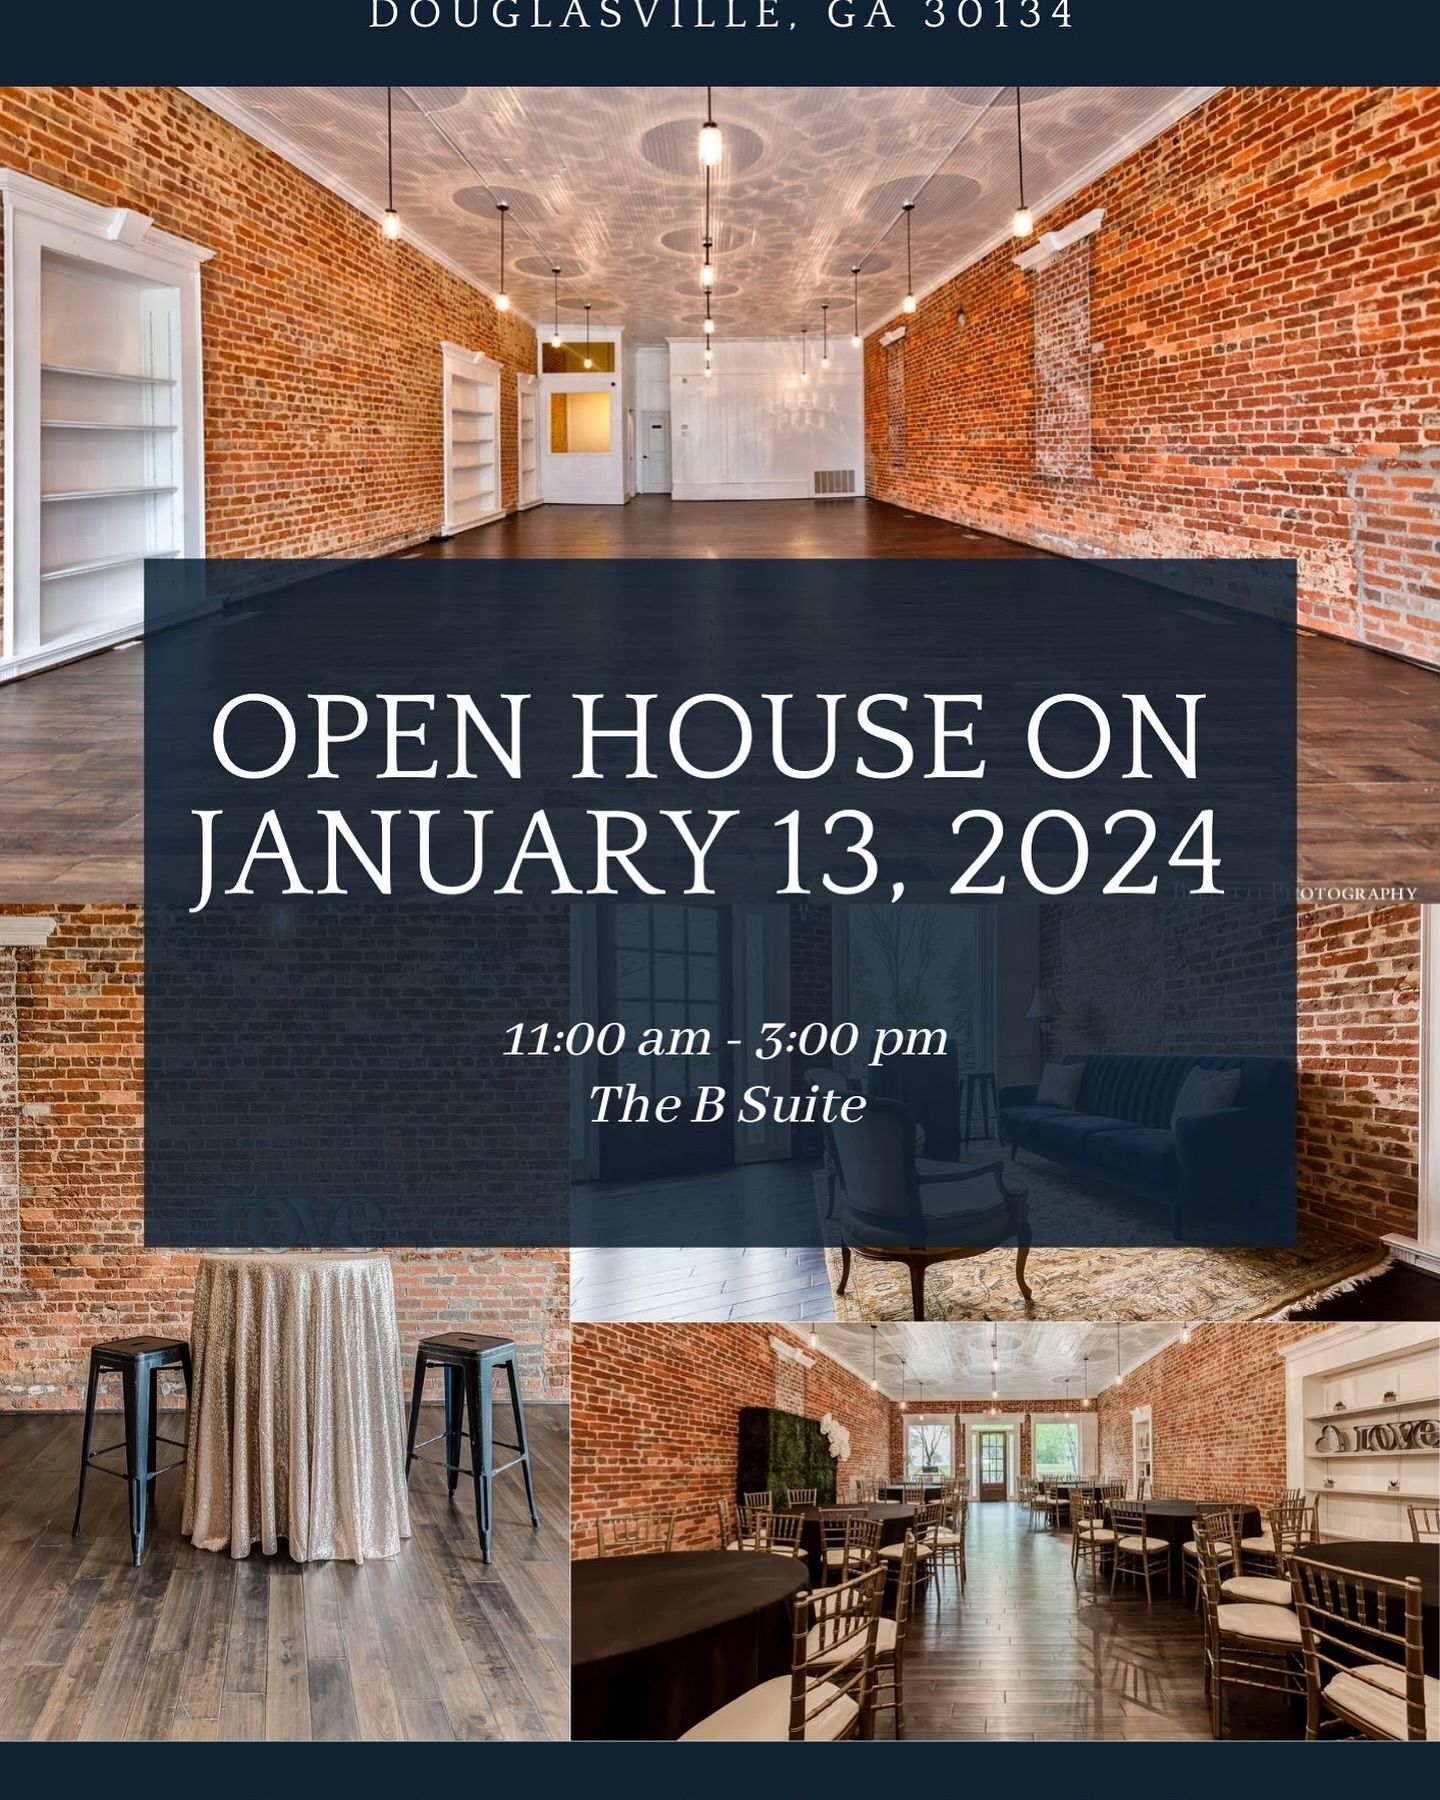 Image for post: The B Suite Open House - January 2024